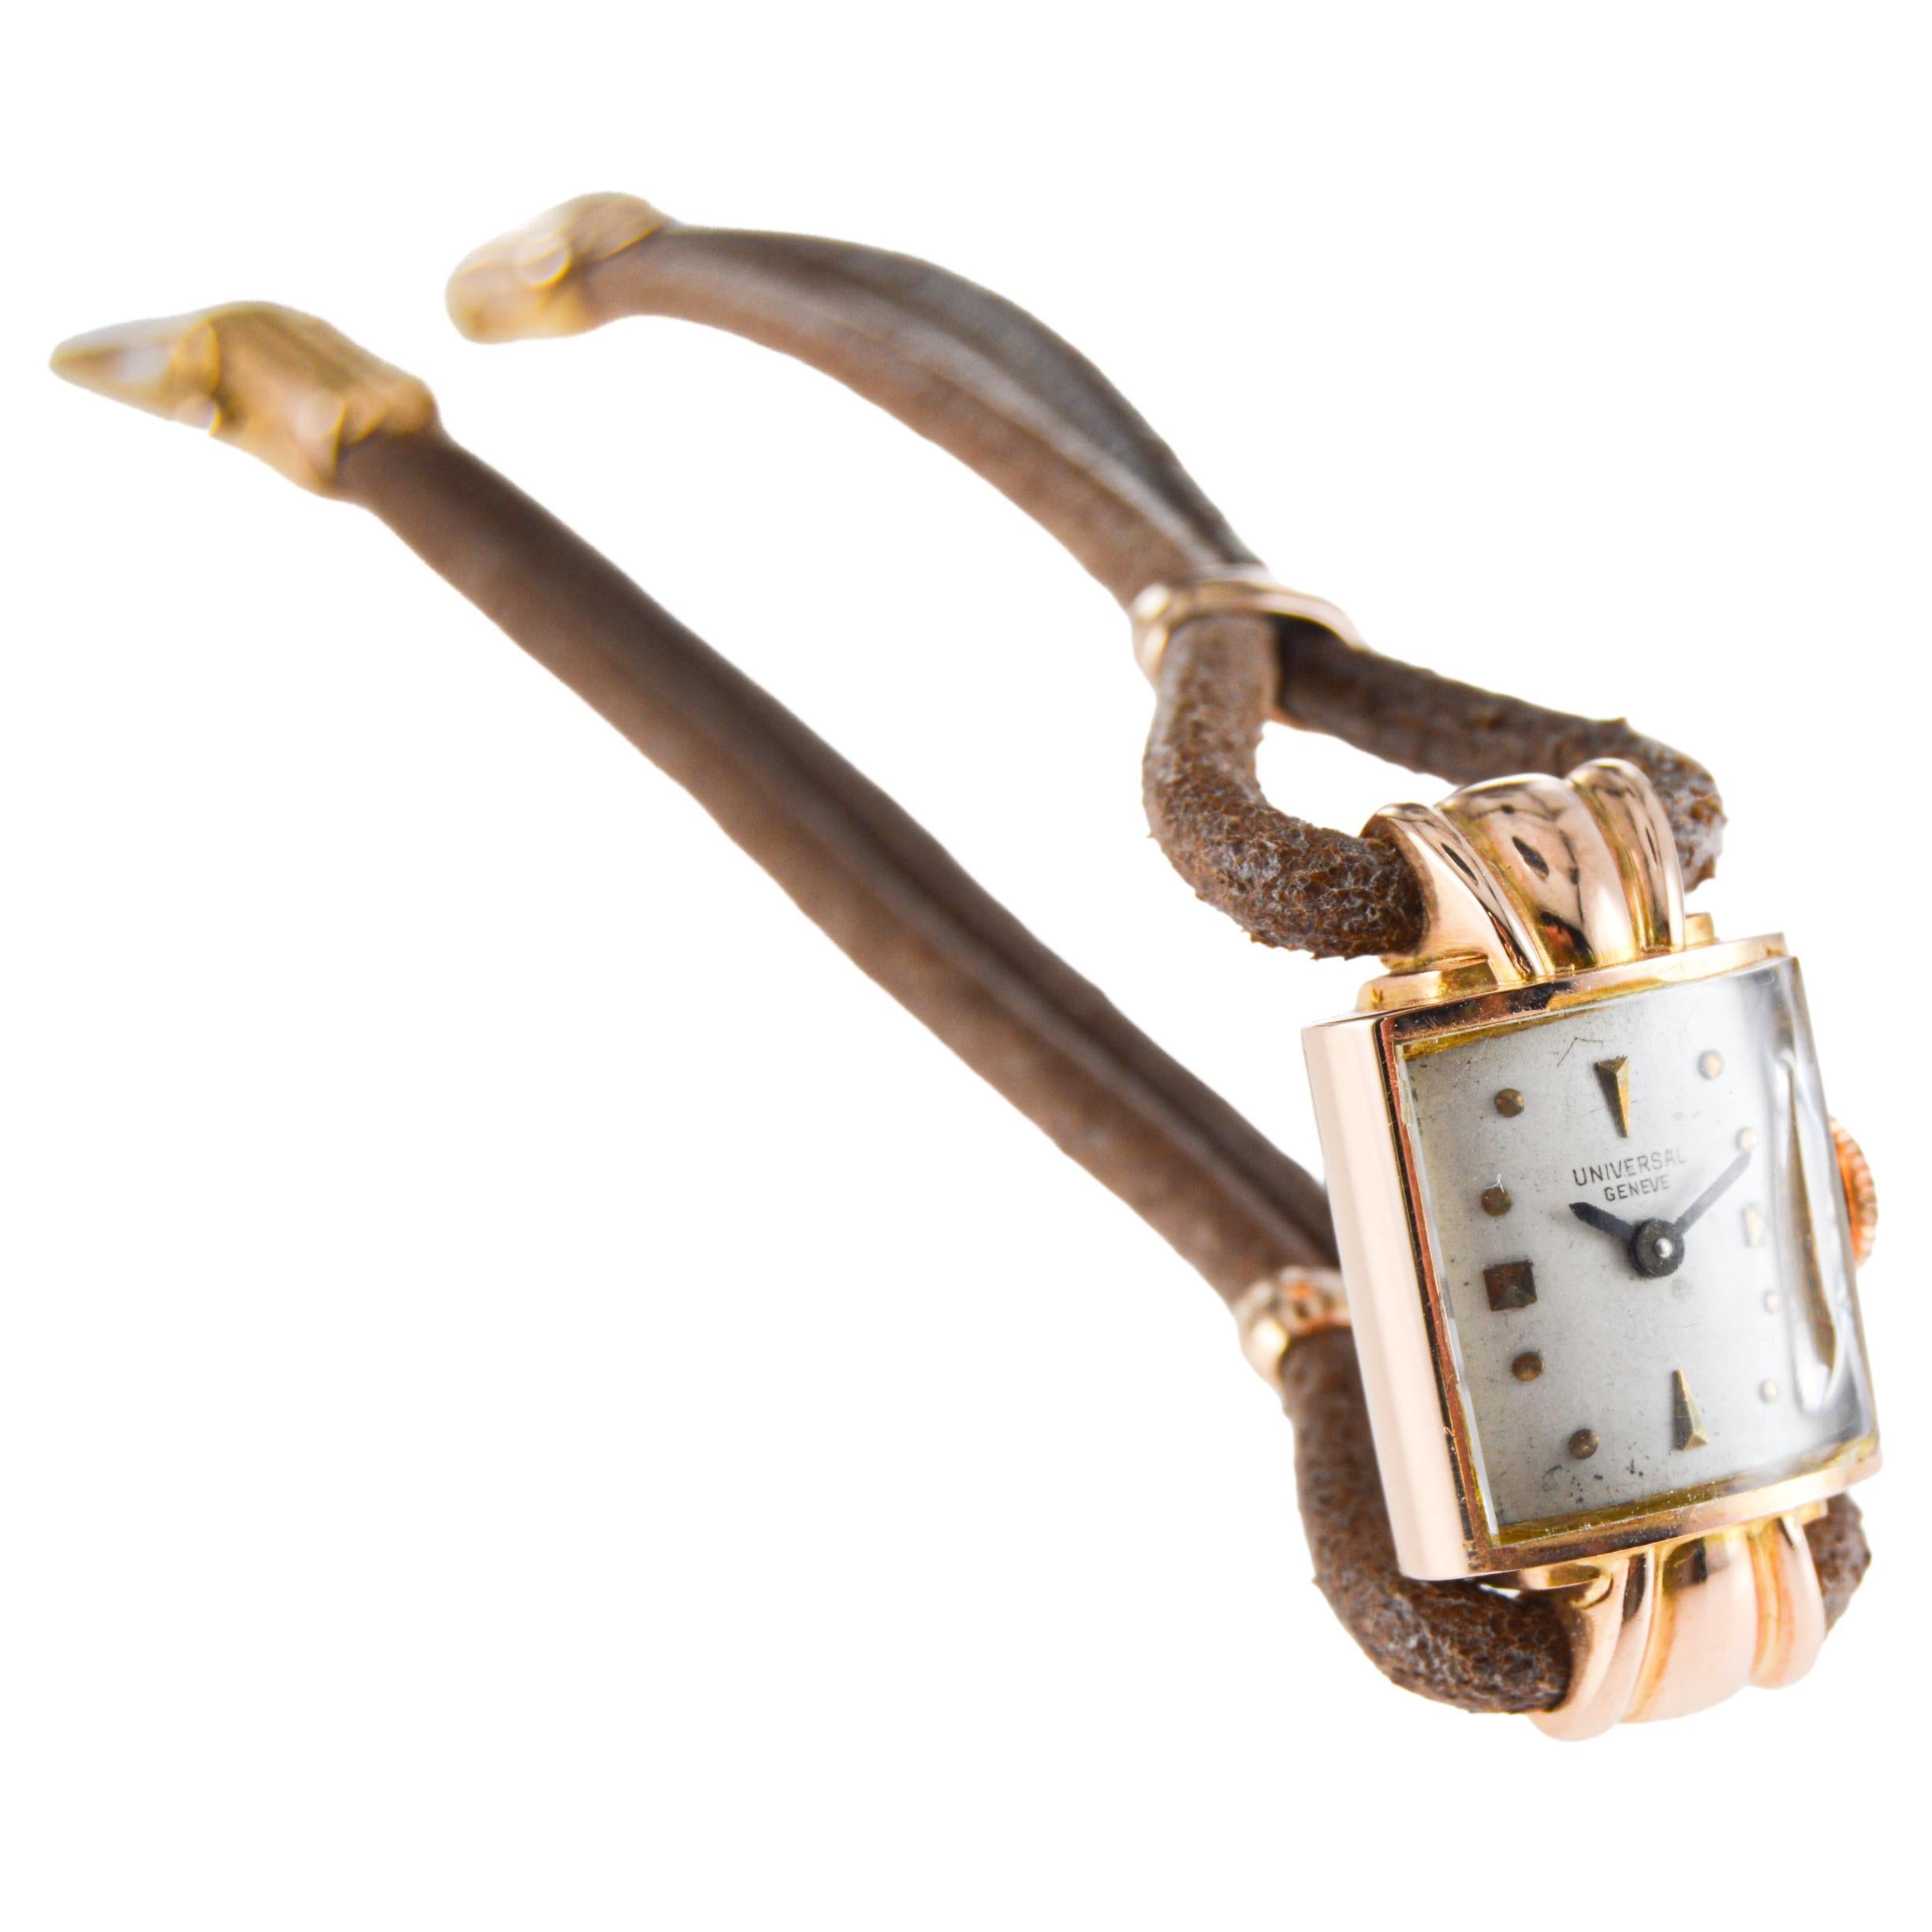 FACTORY / HOUSE: Universal Geneve Watch Company
STYLE / REFERENCE: Art Deco 
METAL / MATERIAL: 18Kt Pink Gold
CIRCA / YEAR: 1940's
DIMENSIONS / SIZE: Length 27mm X Width 15mm
MOVEMENT / CALIBER: Manual Winding / 17 Jewels / Caliber 219
DIAL / HANDS: